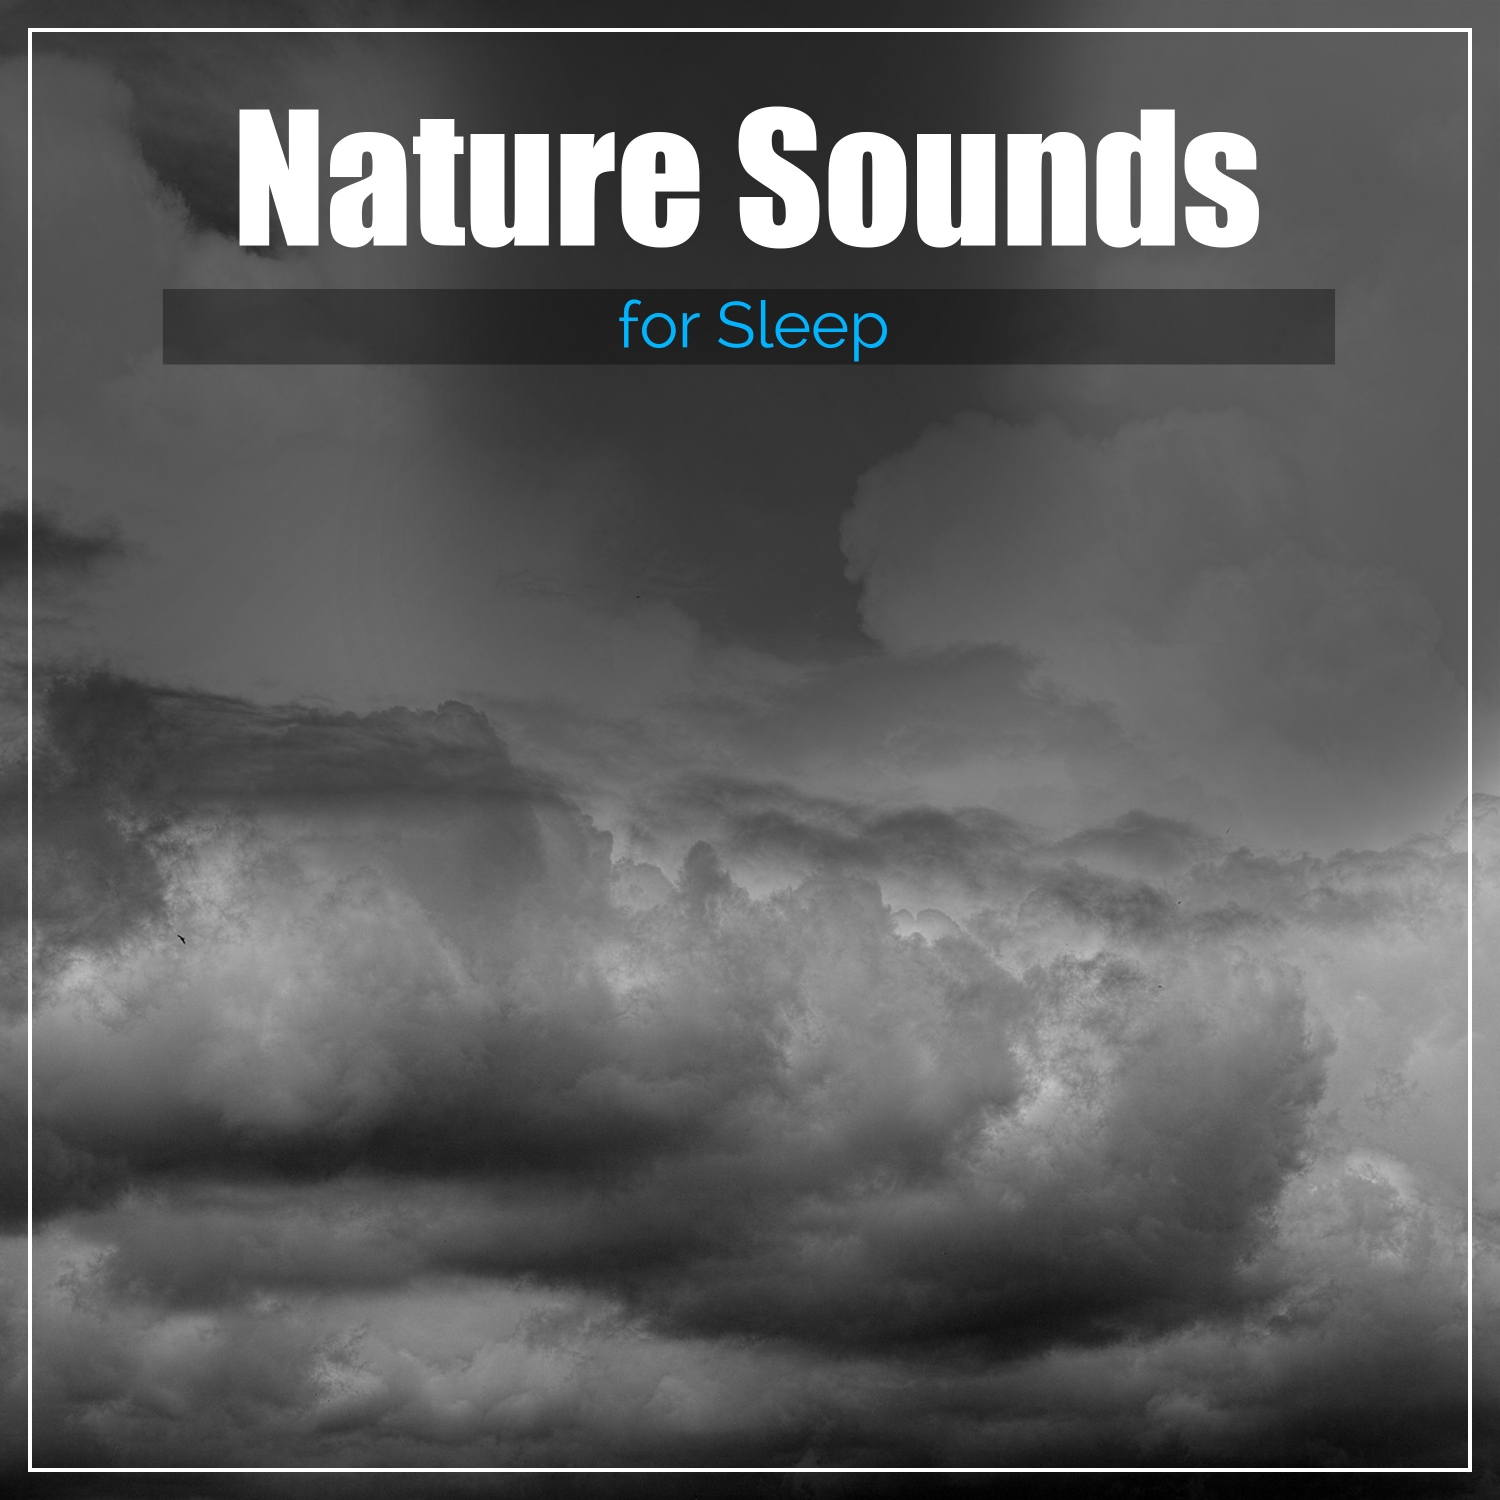 12 Nature Sounds for Sleep, Insomnia, Relaxation and Peace